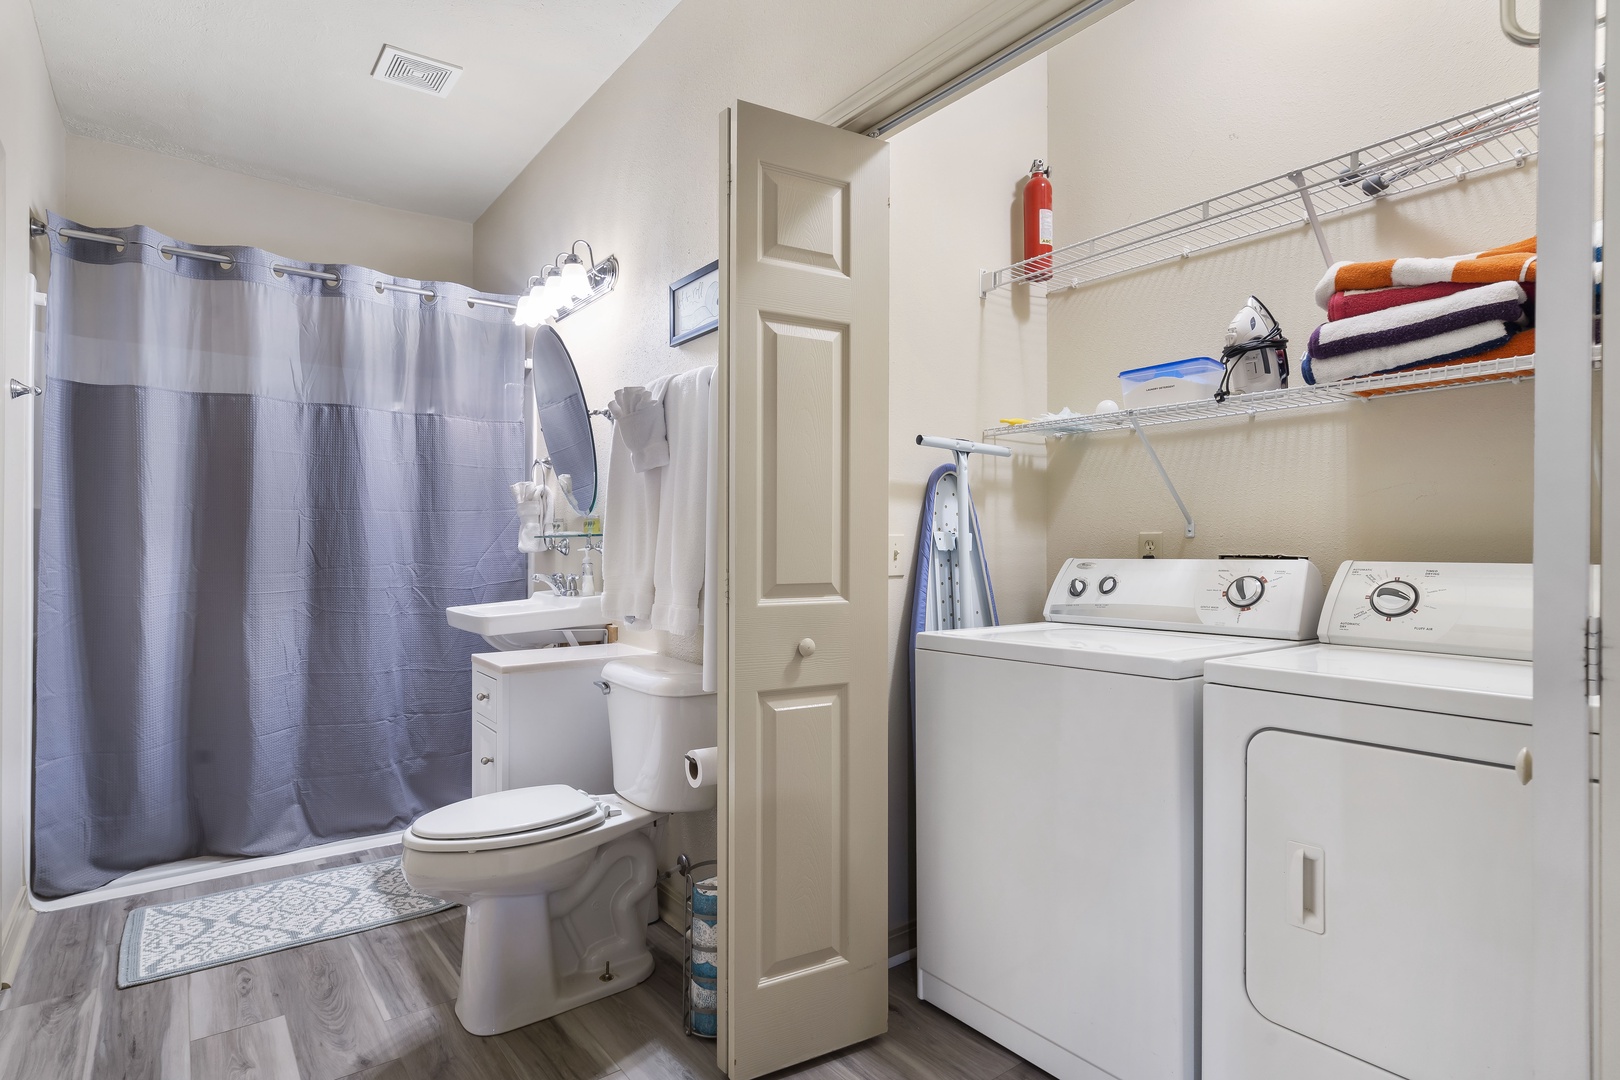 Bathroom 1 shared en-suite with walk-in shower, and laundry closet accessible from the living room